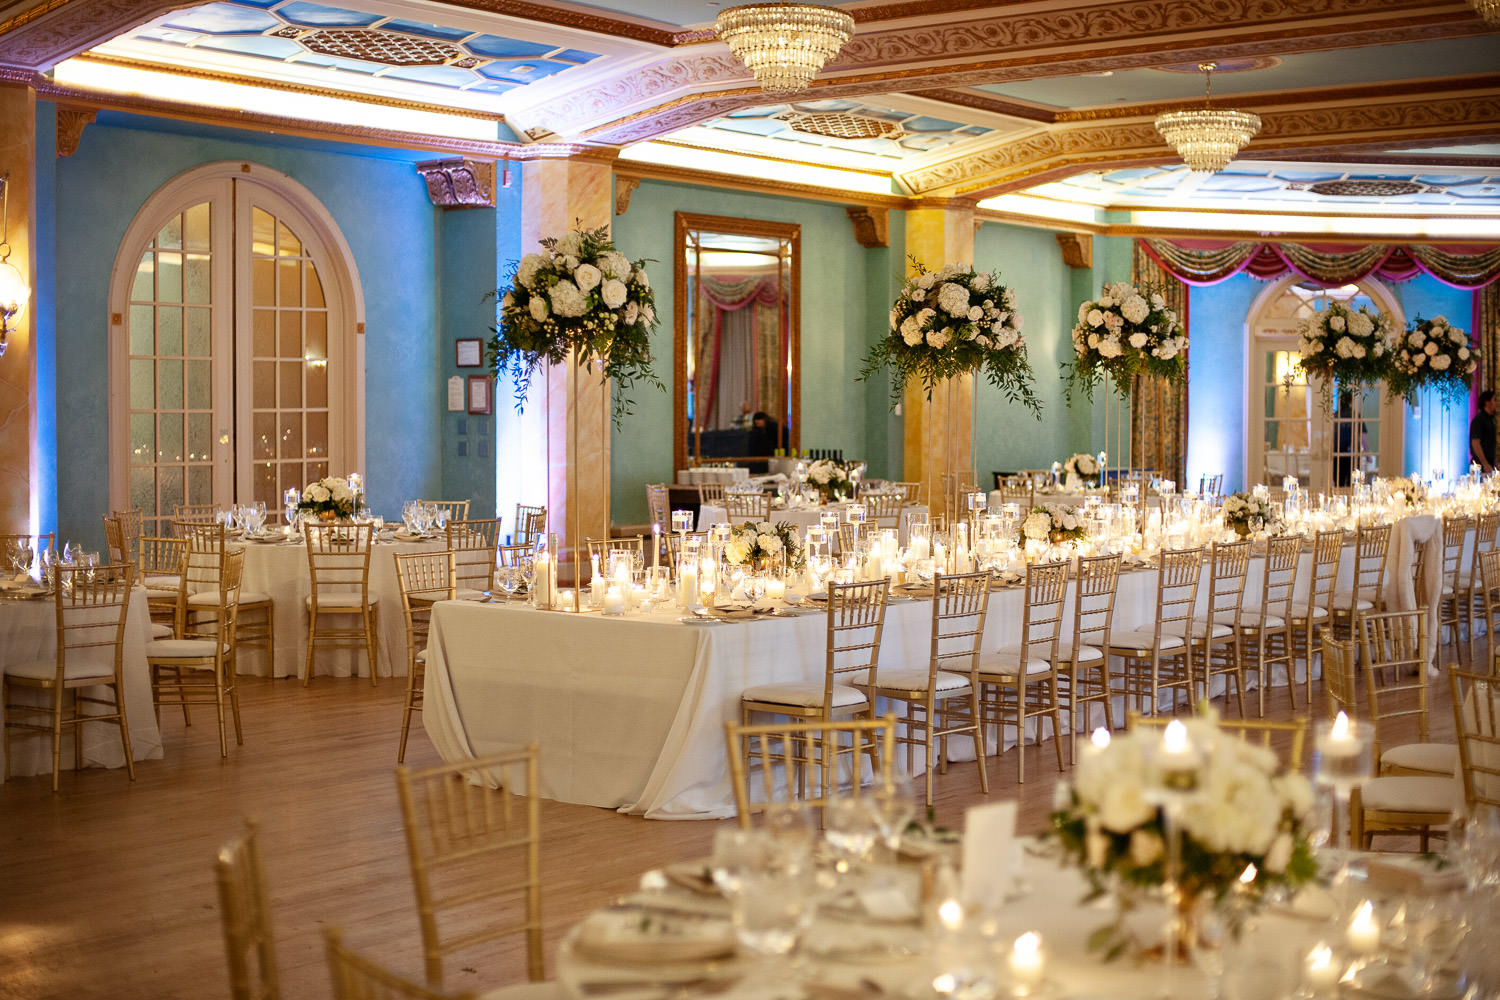 Cascade ballroom at the Banff Springs Hotel captured by Tara Whittaker Photography